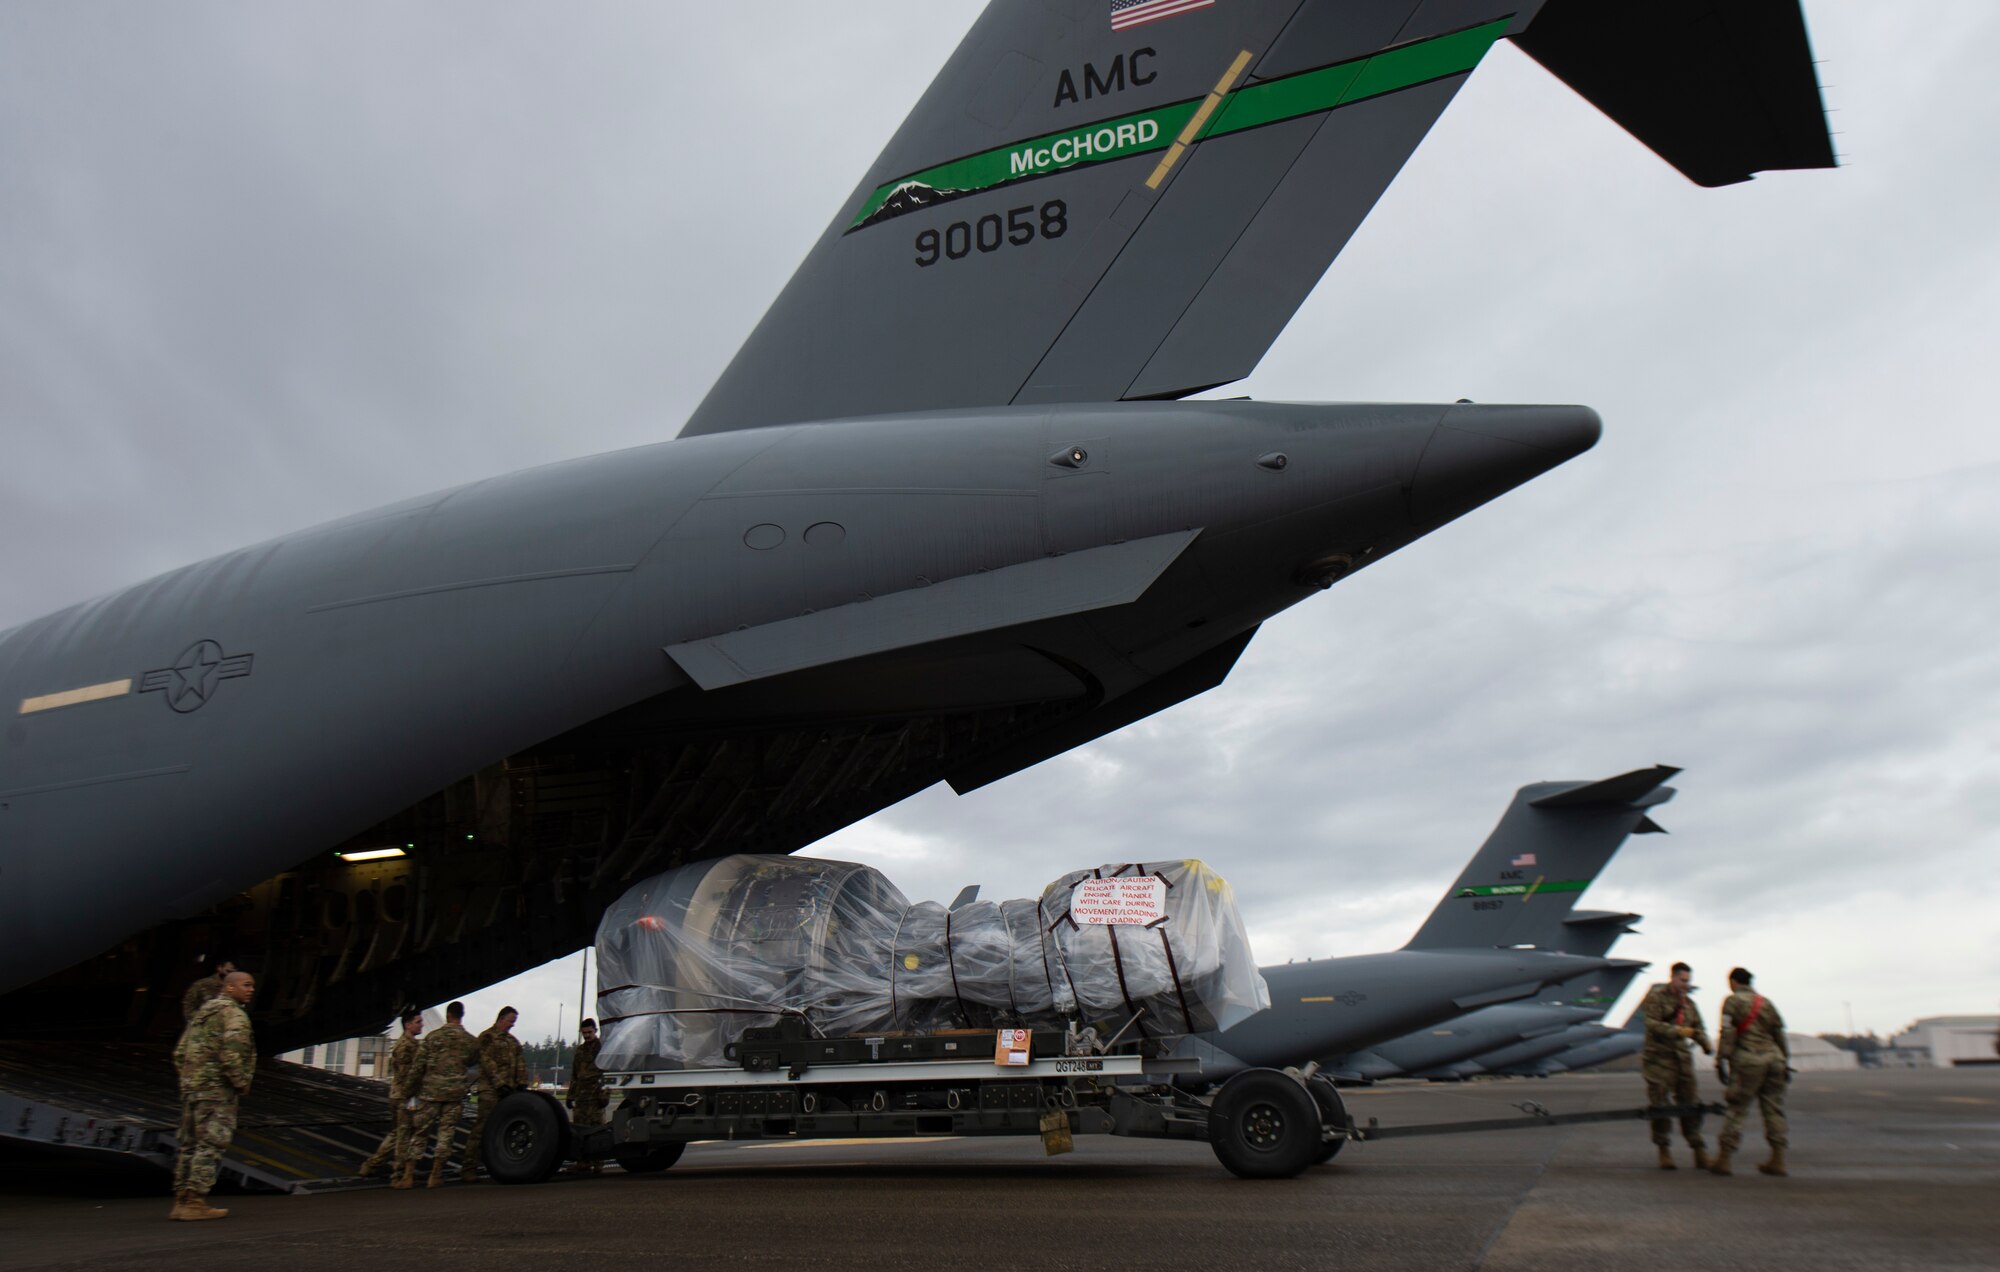 A C-17 Globemaster III jet engine is loaded onto a C-17 at Joint Base Lewis-McChord, Washington, Nov. 27, 2021. The jet engine was being delivered to Joint Base McGuire-Dix-Lakehurst, New Jersey, during the 816th Expeditionary Airlift Squadron deployment swap out at Al Udeid Air Base, Qatar. 
(U.S. Air Force photo by Staff Sgt. Tryphena Mayhugh)